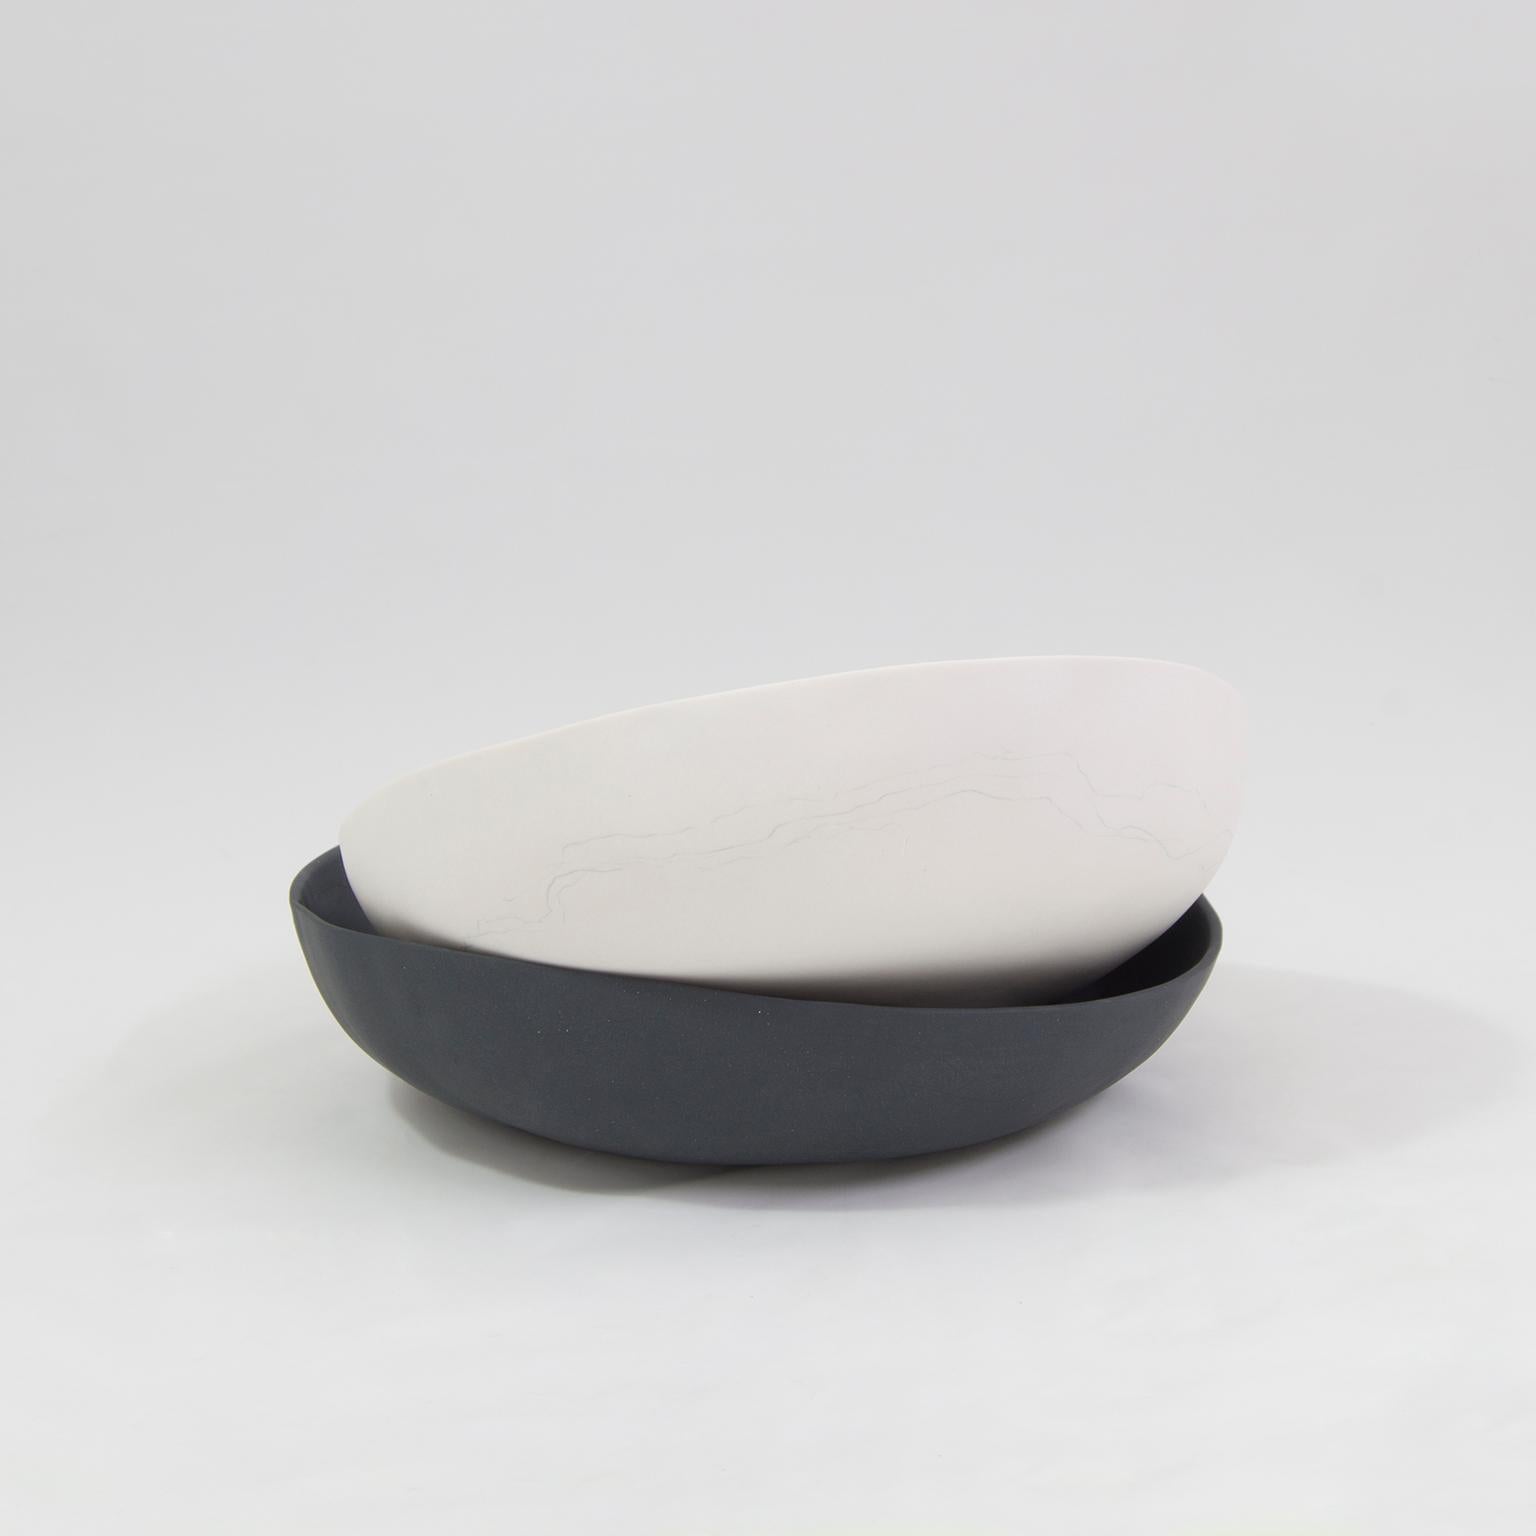 Each Big bowl is handcrafted by Mexican artisans. Slight variations in shape and size are to be expected and embraced as they add to the uniqueness of every piece. 

This contemporary porcelain bowl can be used for decoration or as a plate. It is